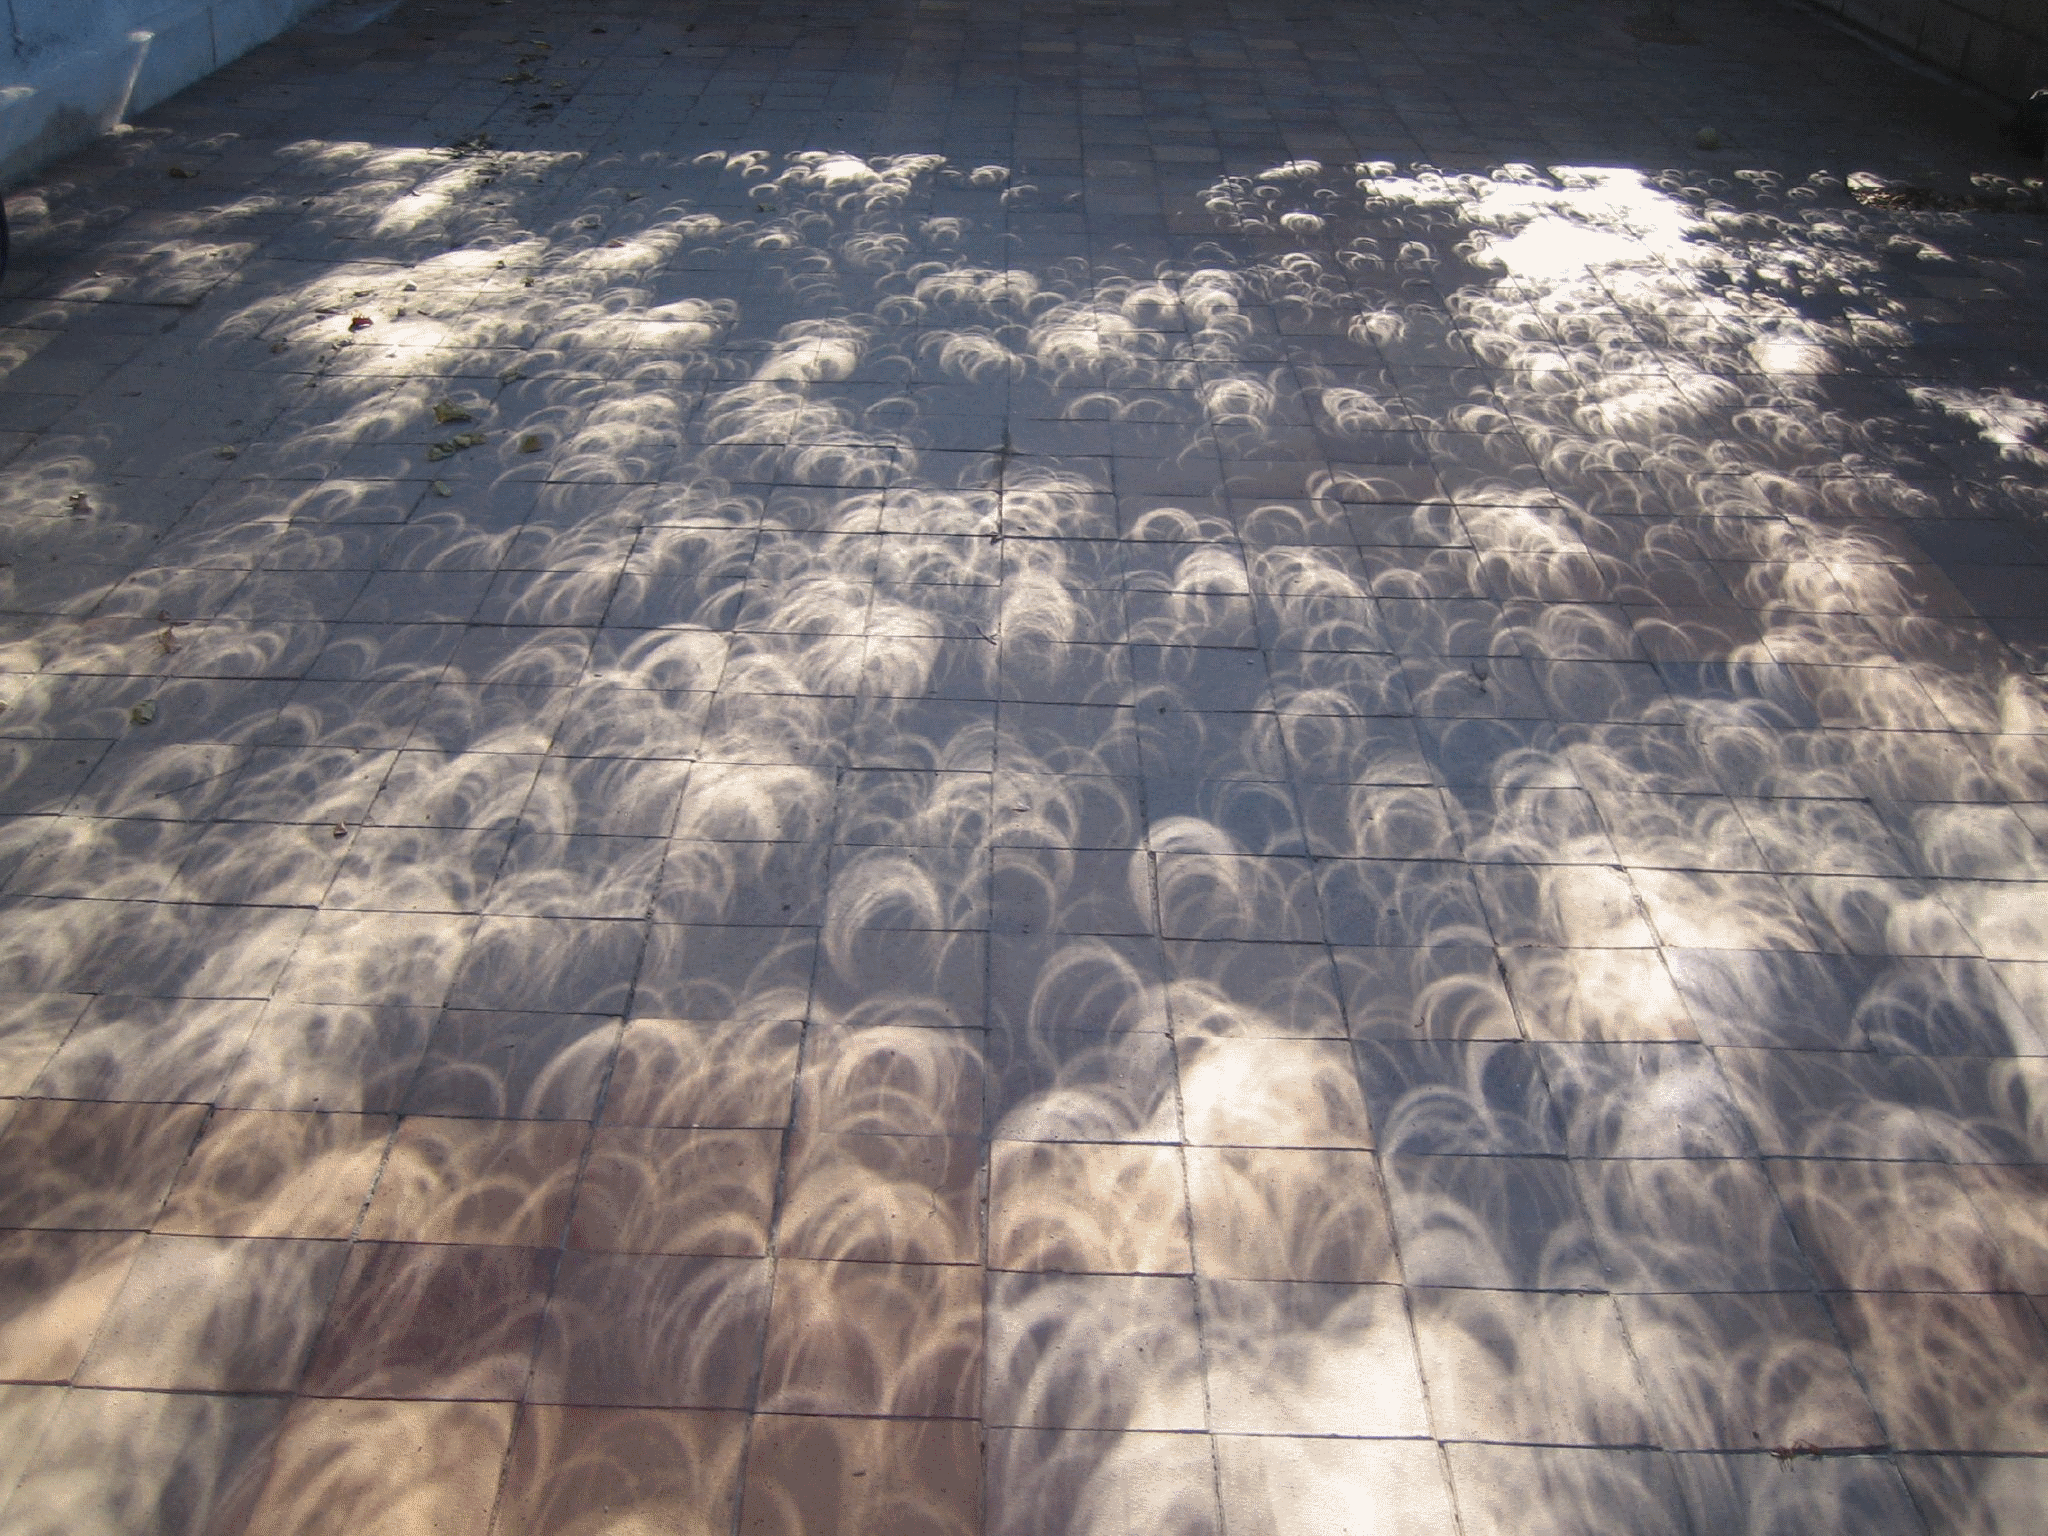 Shadows of an annular eclipse of October 3, 2005. By Nils van der Burg of Madrid, Spain. Via Wikimedia Commons.